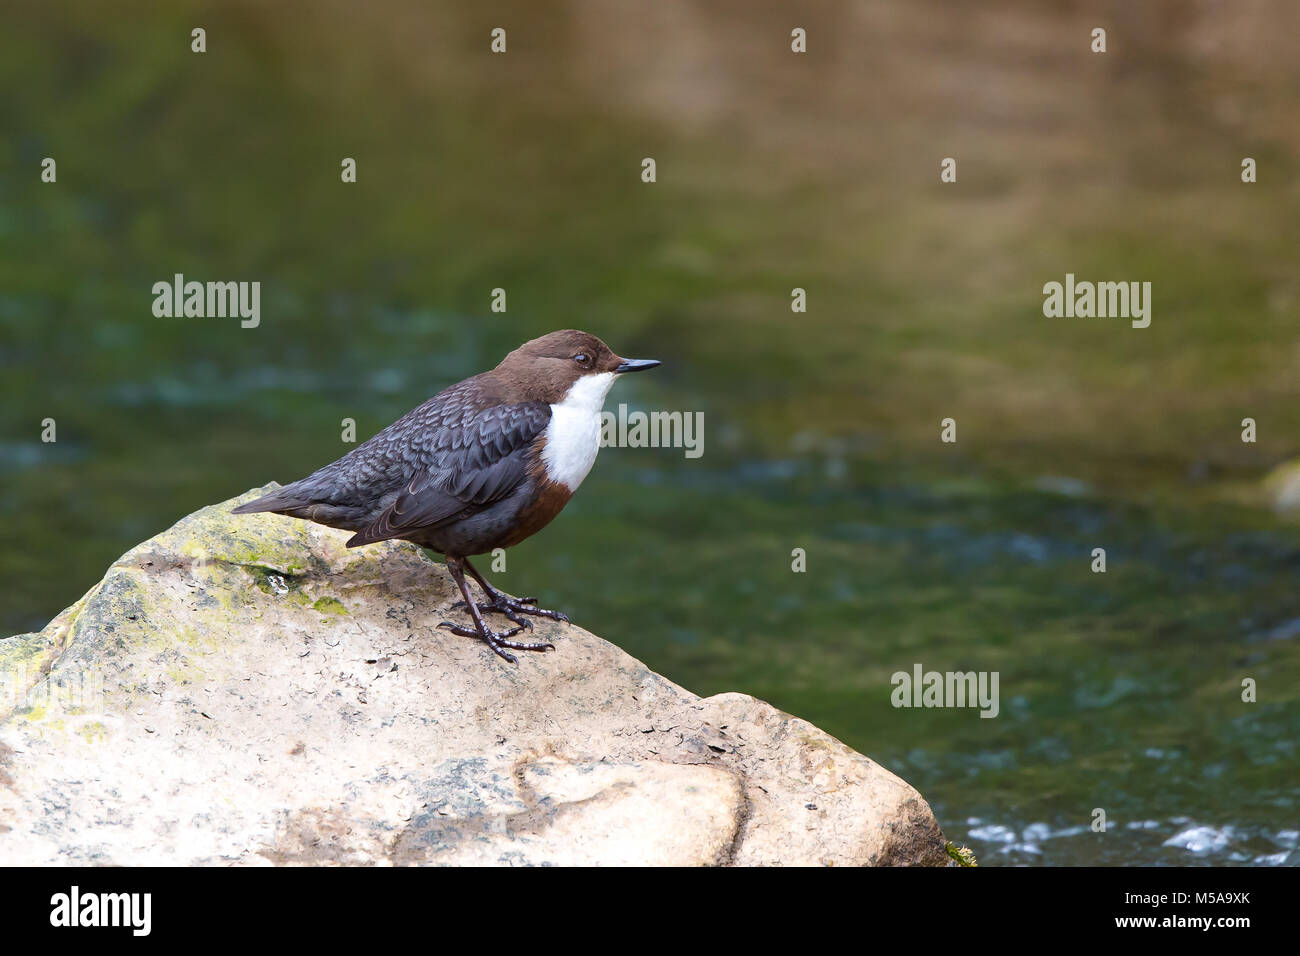 Detailed, close-up side view of isolated, wild dipper bird (Cinclus cinclus) perched outdoors in natural UK habitat on rocks by fast-flowing water. Stock Photo